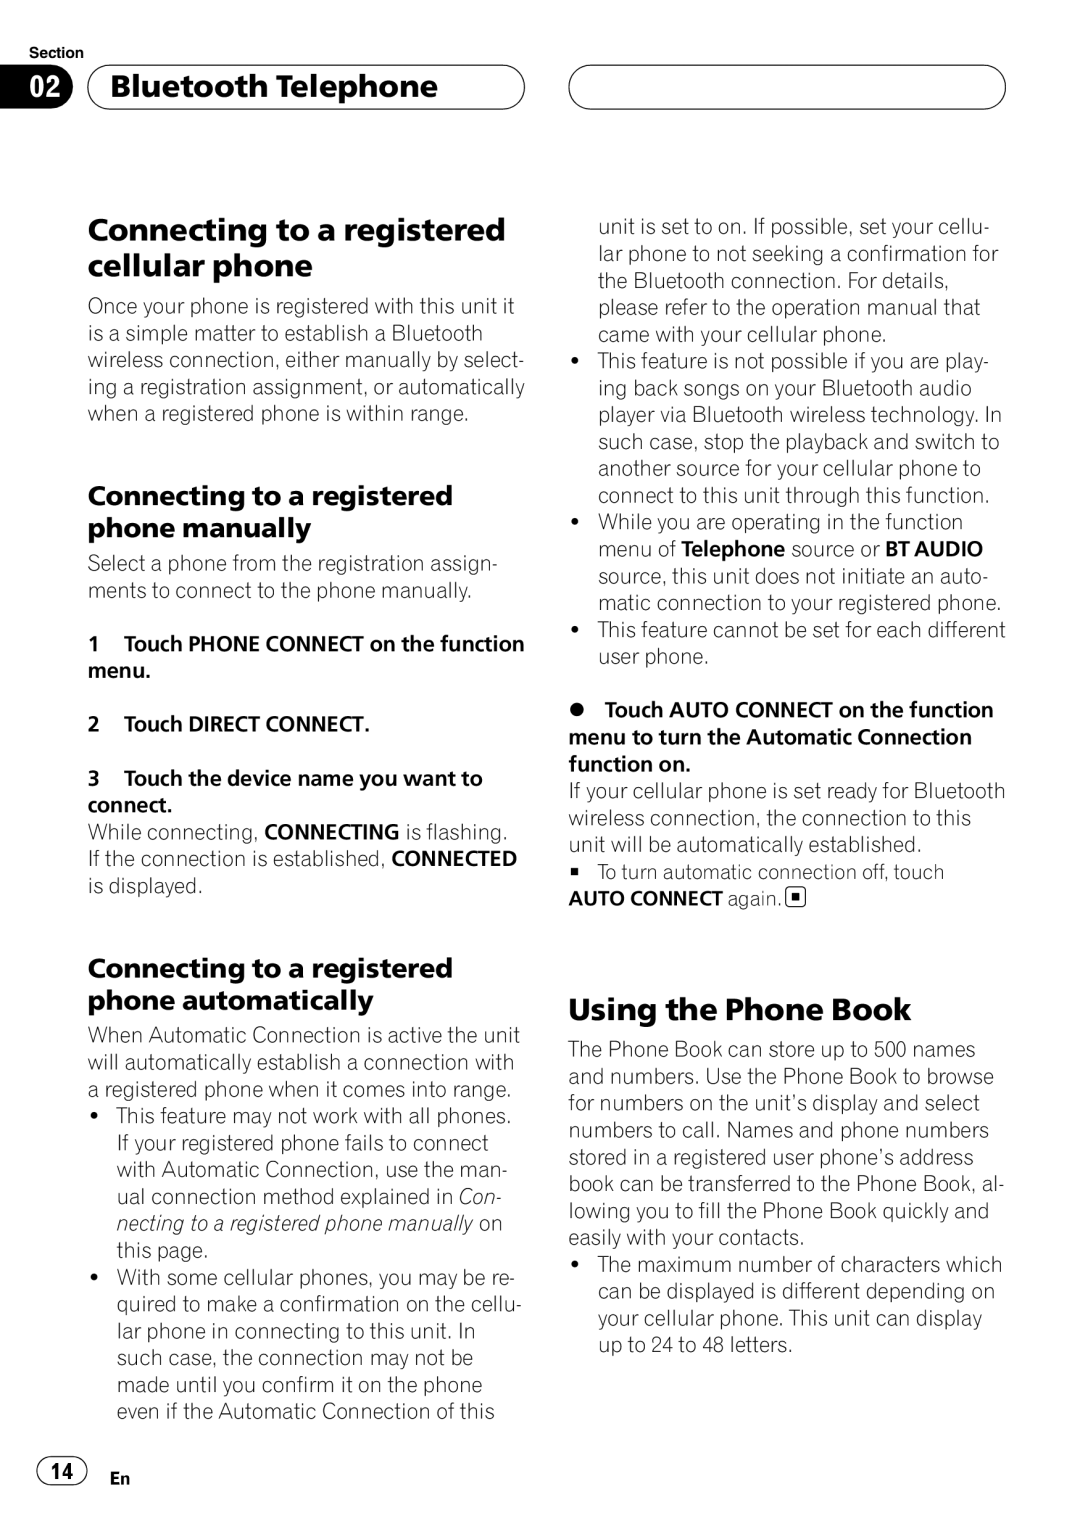 Pioneer CD-BTB100 owner manual Bluetooth Telephone Connecting to a registered cellular phone, Using the Phone Book 